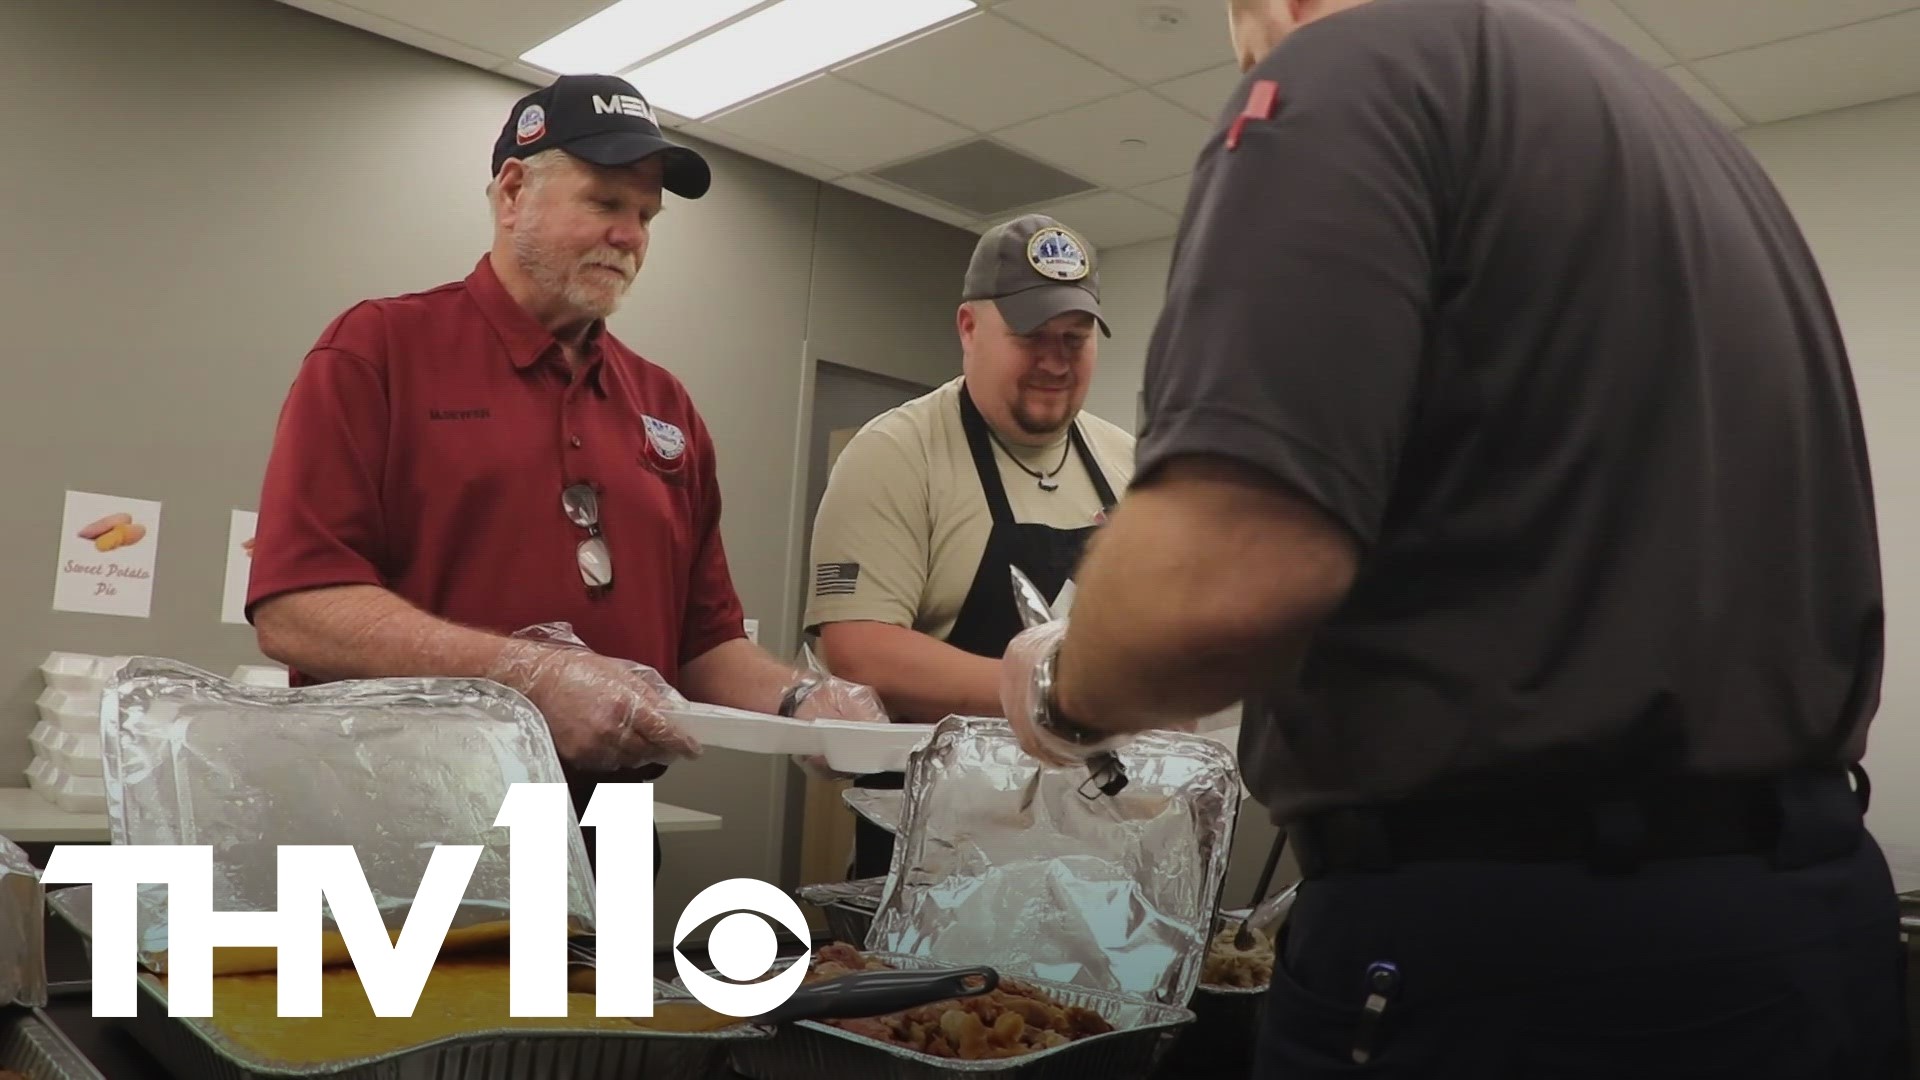 Today is a day of gathering with friends and family, and some first responders shared how they found a way to come together this Thanksgiving.